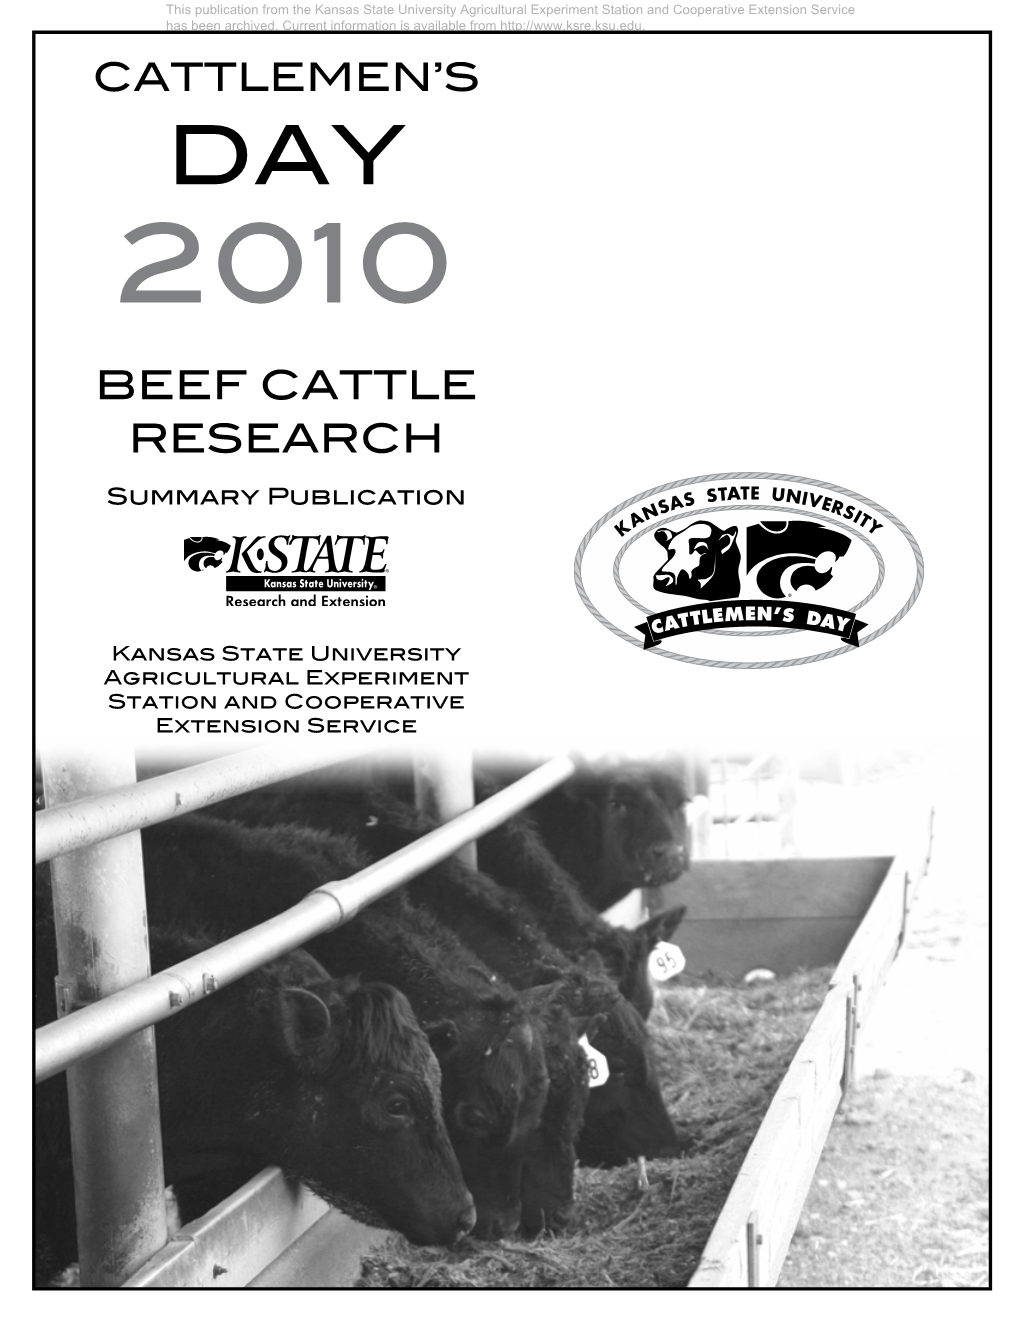 Summary Publication: Cattlemen's Day 2010, Beef Cattle Research